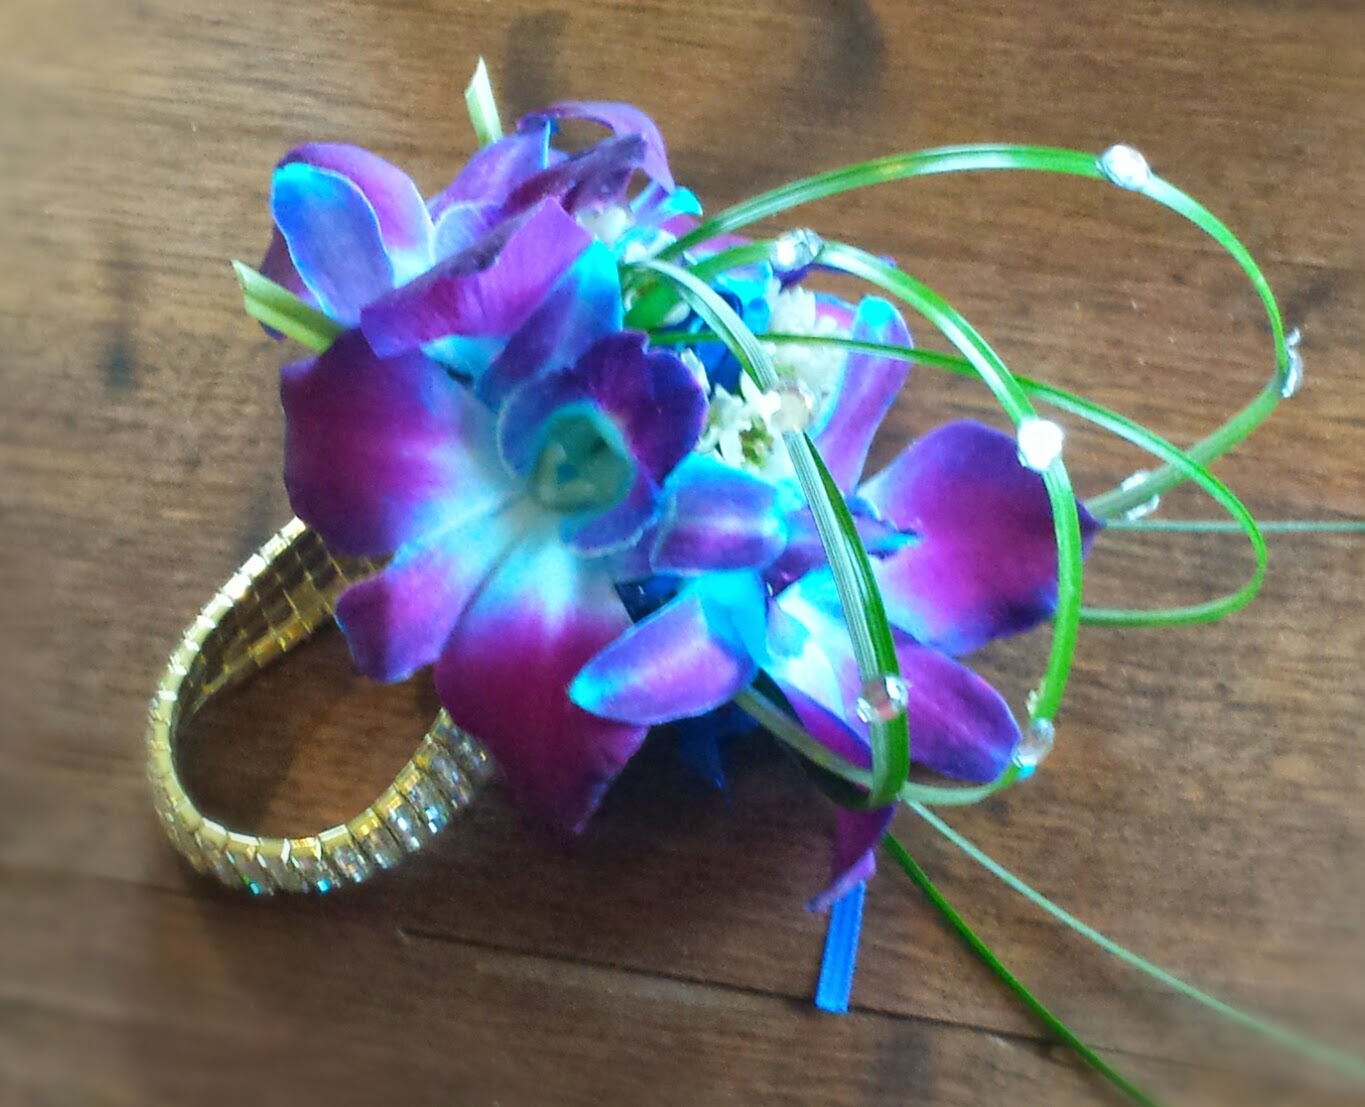 Why we love orchids for prom corsages! #PromFlowers